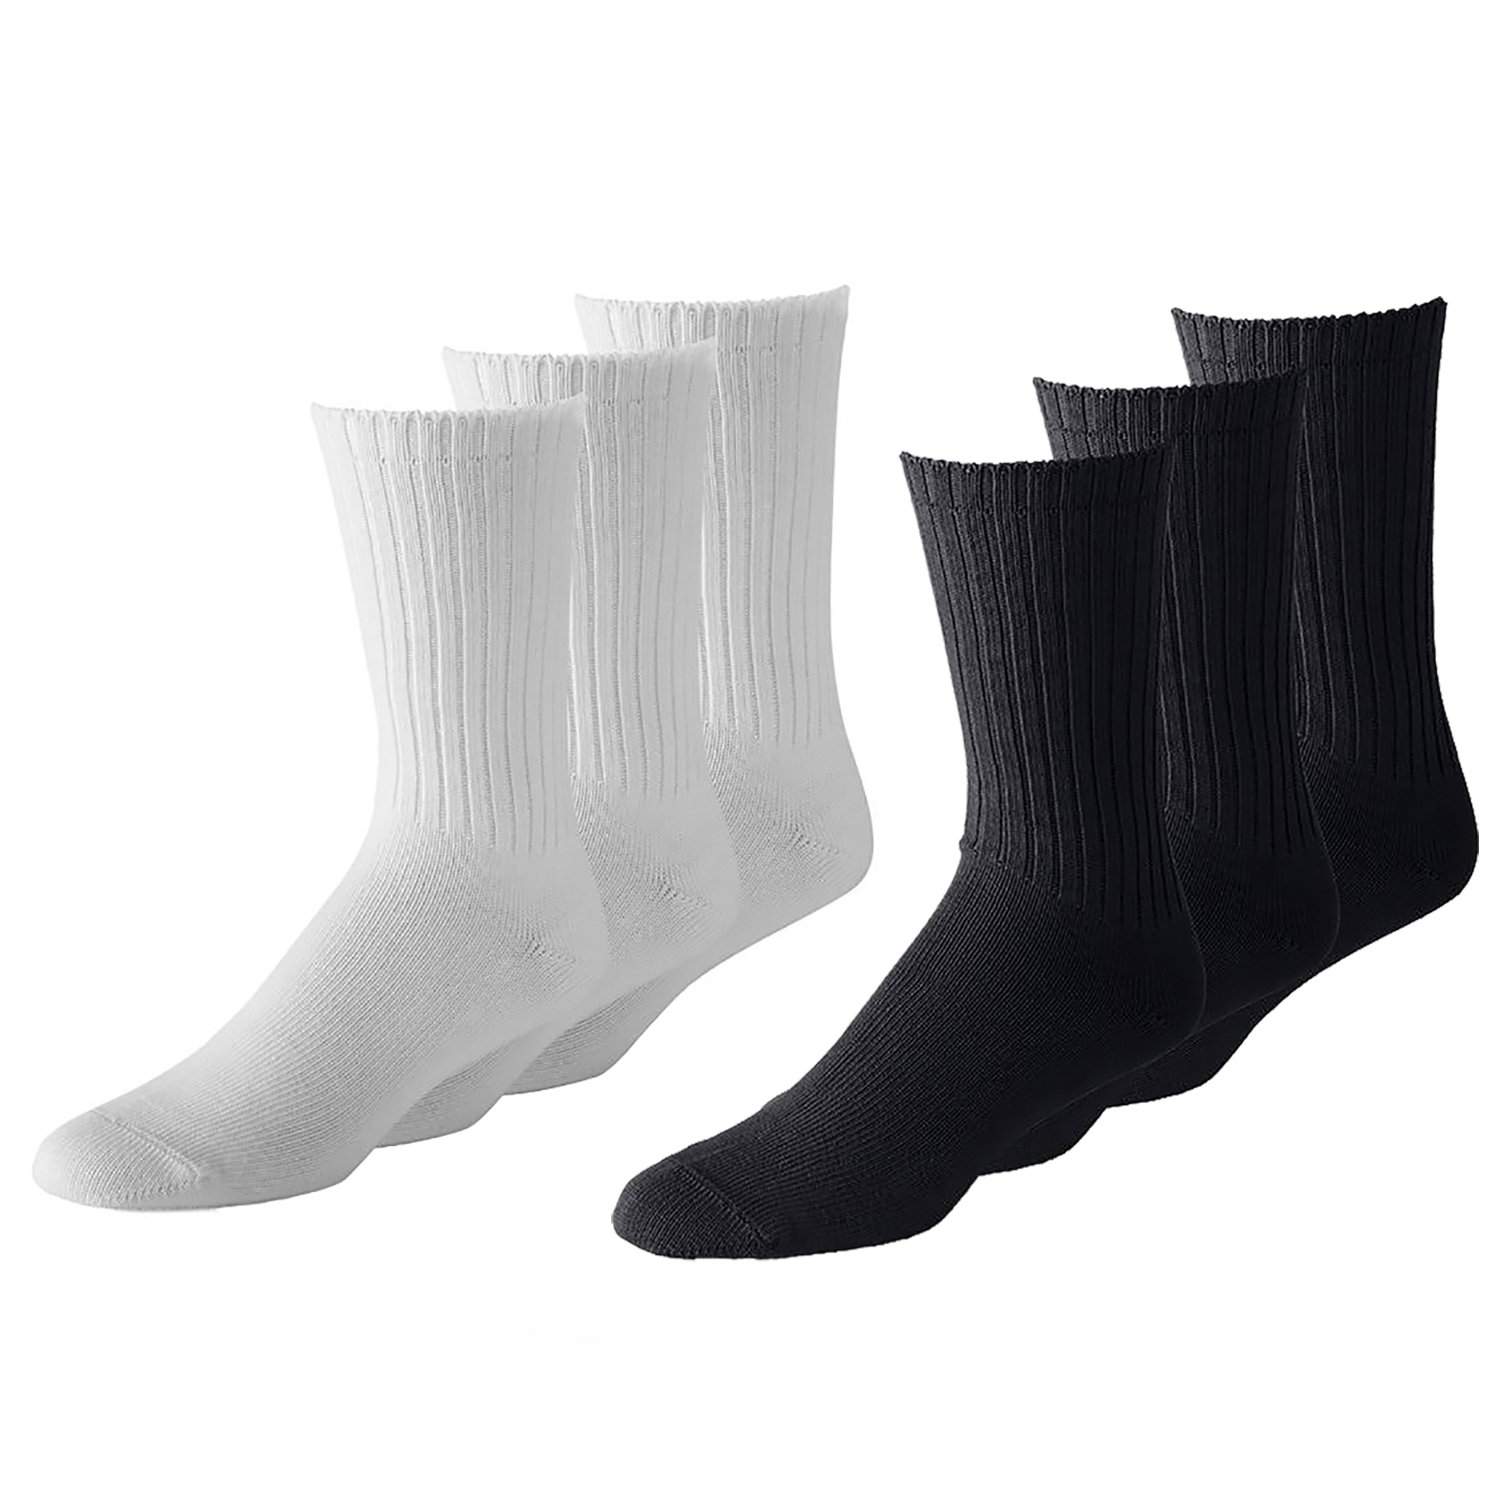 Mechaly Womens Basic Super Comfortable Low Cut and Crew Cotton Socks - 12 Pack